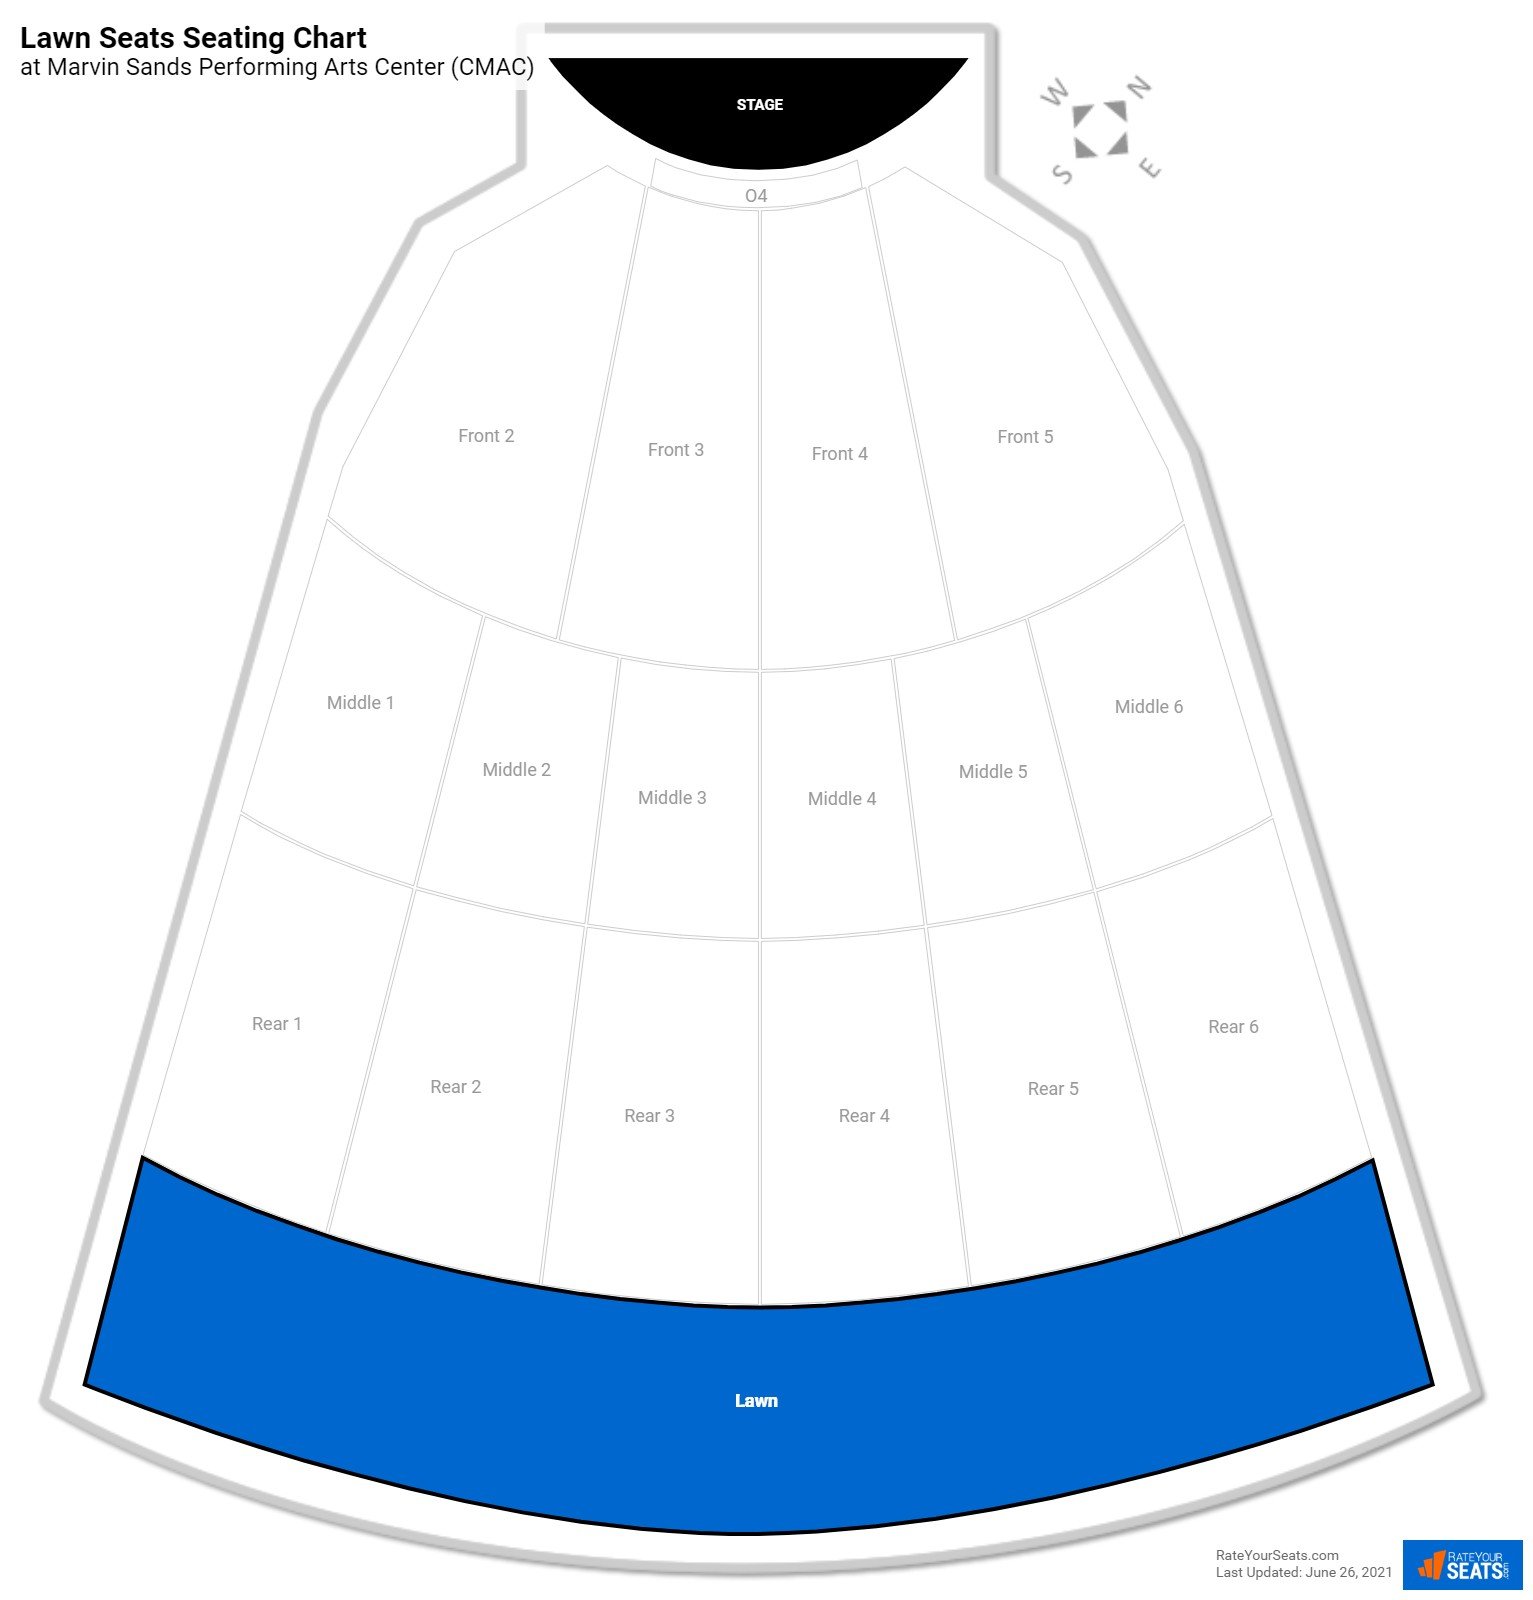 Concert Lawn Seats Seating Chart at CMAC (Marvin Sands Performing Arts Center)